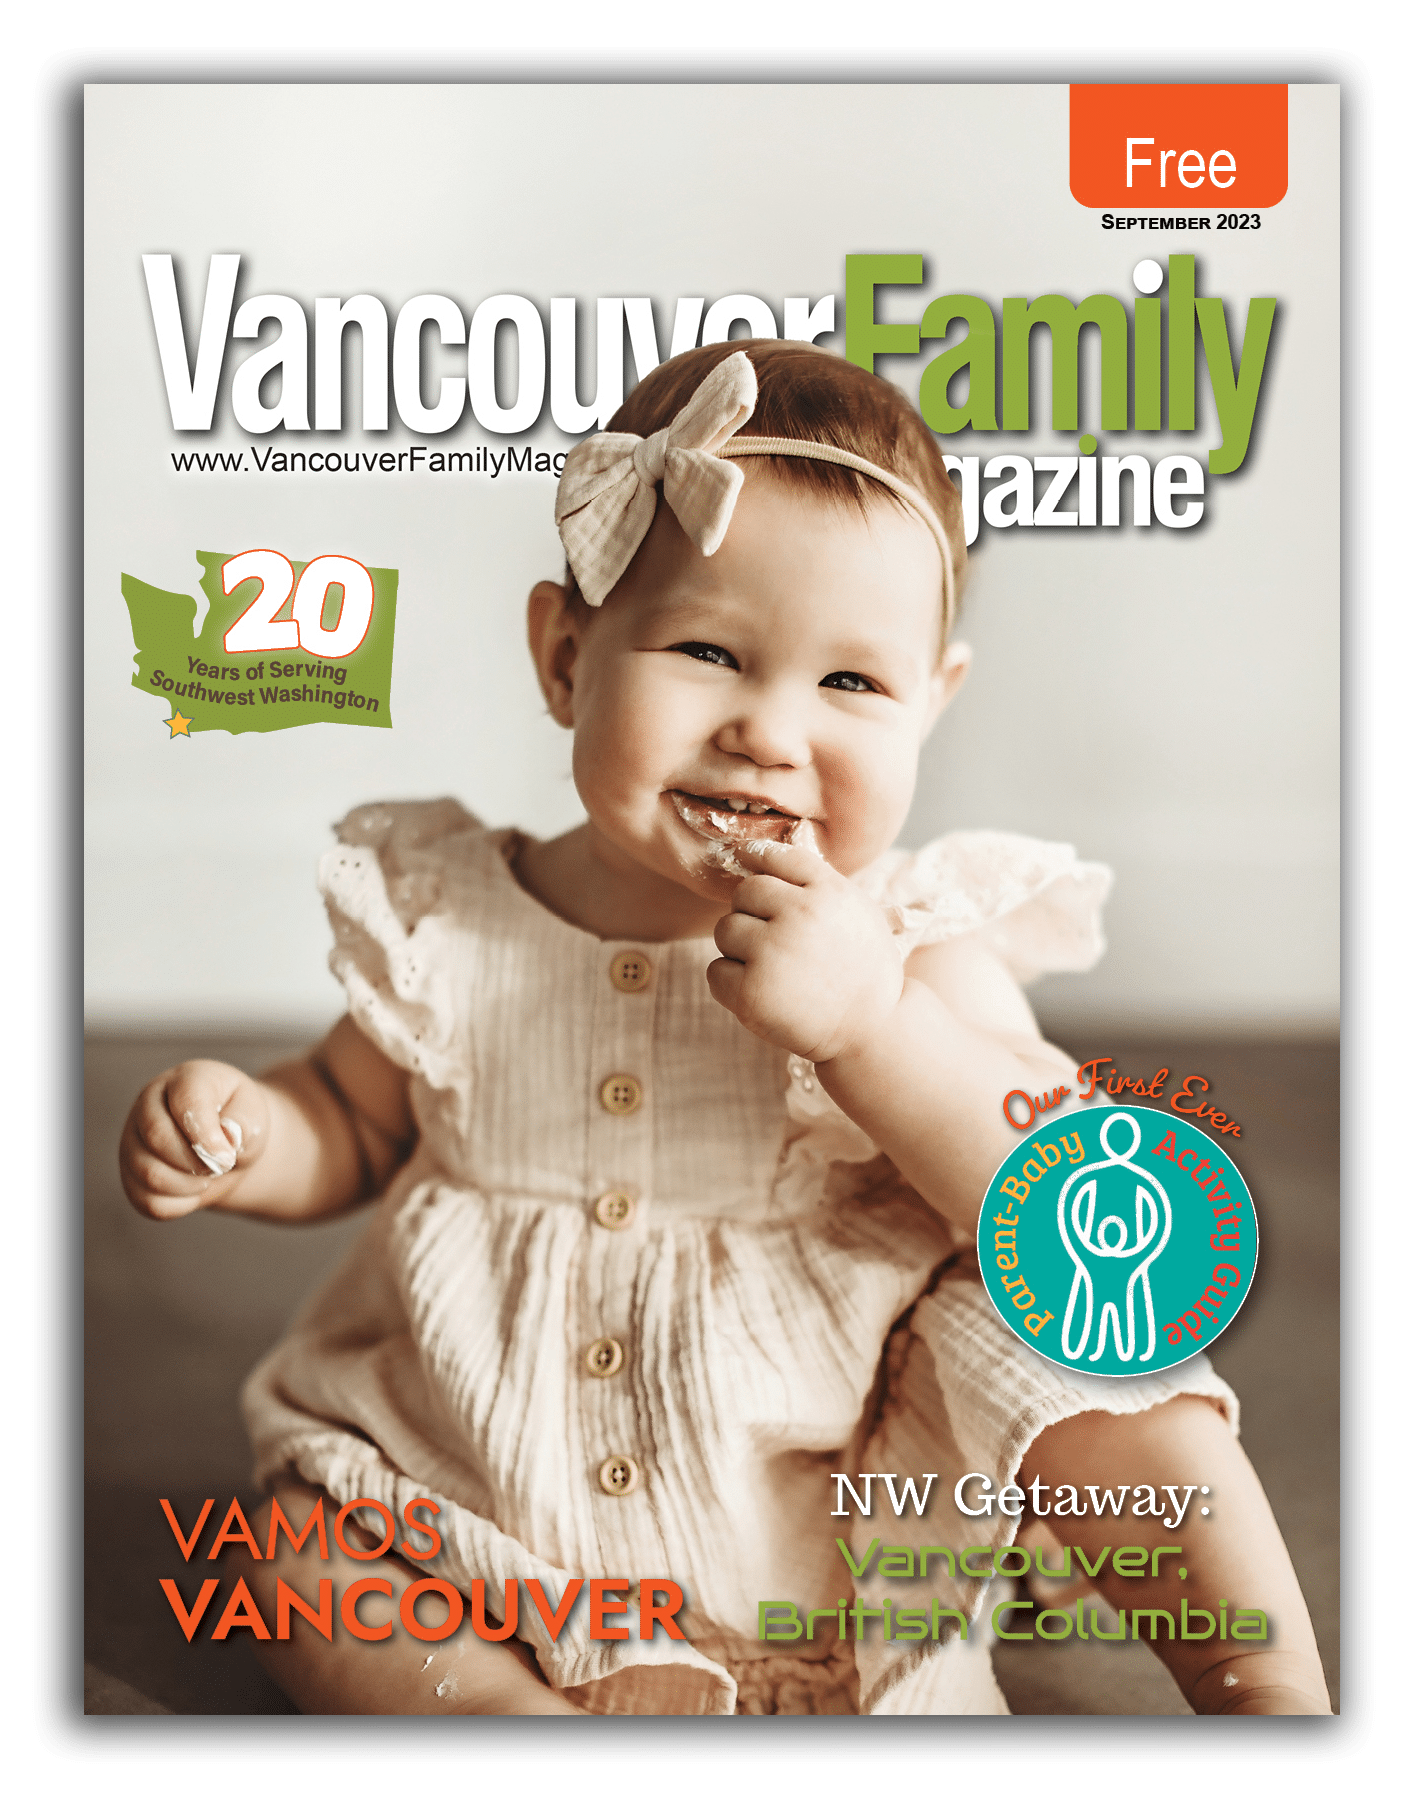 Vancouver Family Magazine's September 2023 issue cover features a baby sitting on the floor happily eating cake